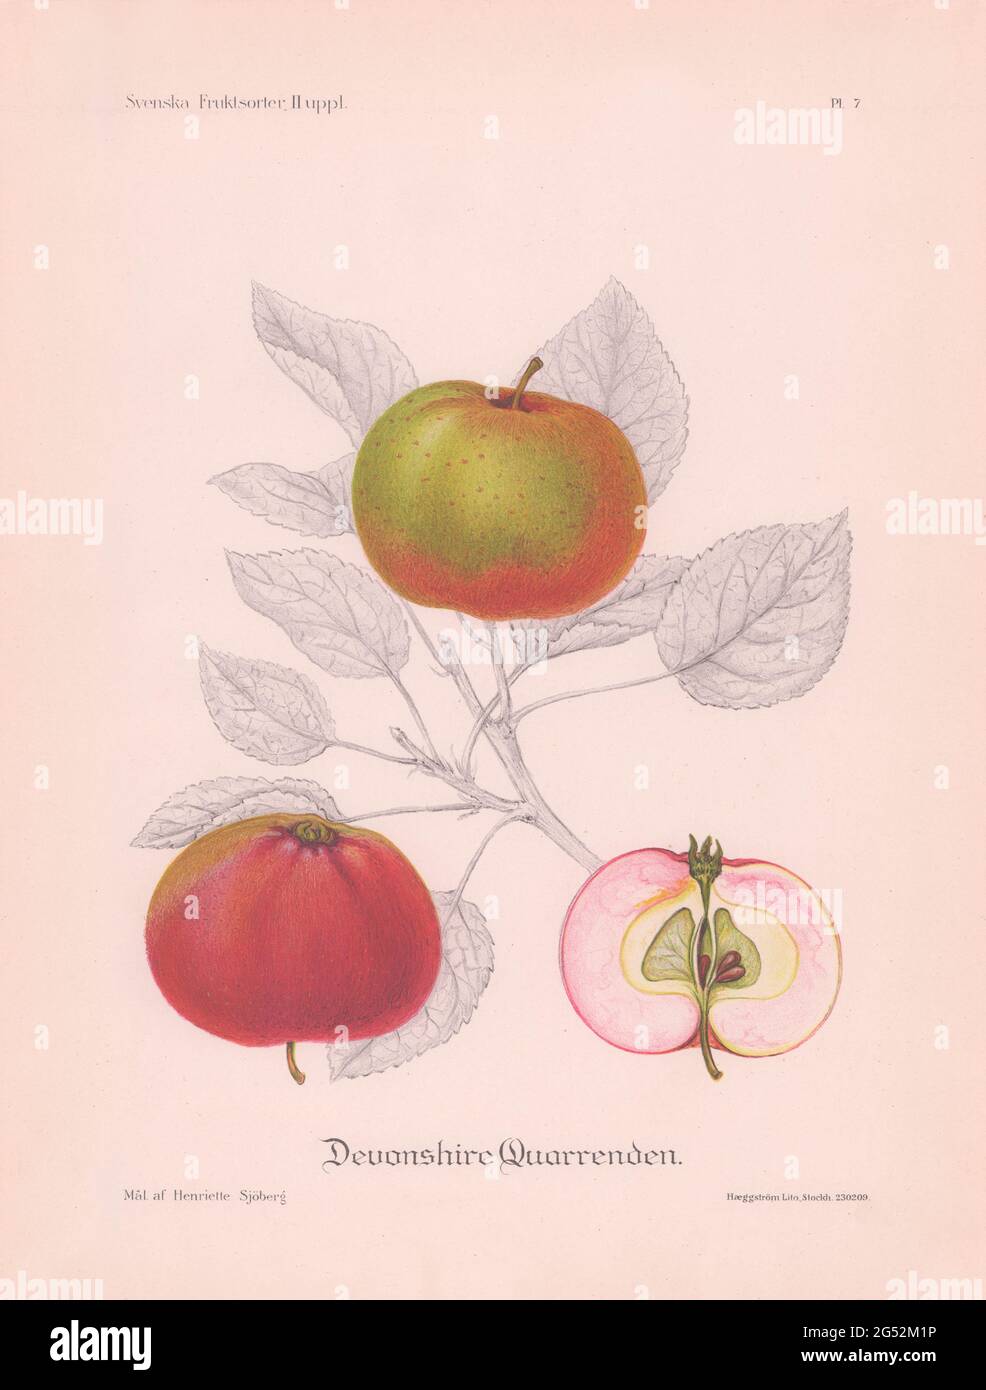 Vintage lithographic reproduction of apple variety painting by the Swedish artist Henriette Sjöberg from 1924. Stock Photo